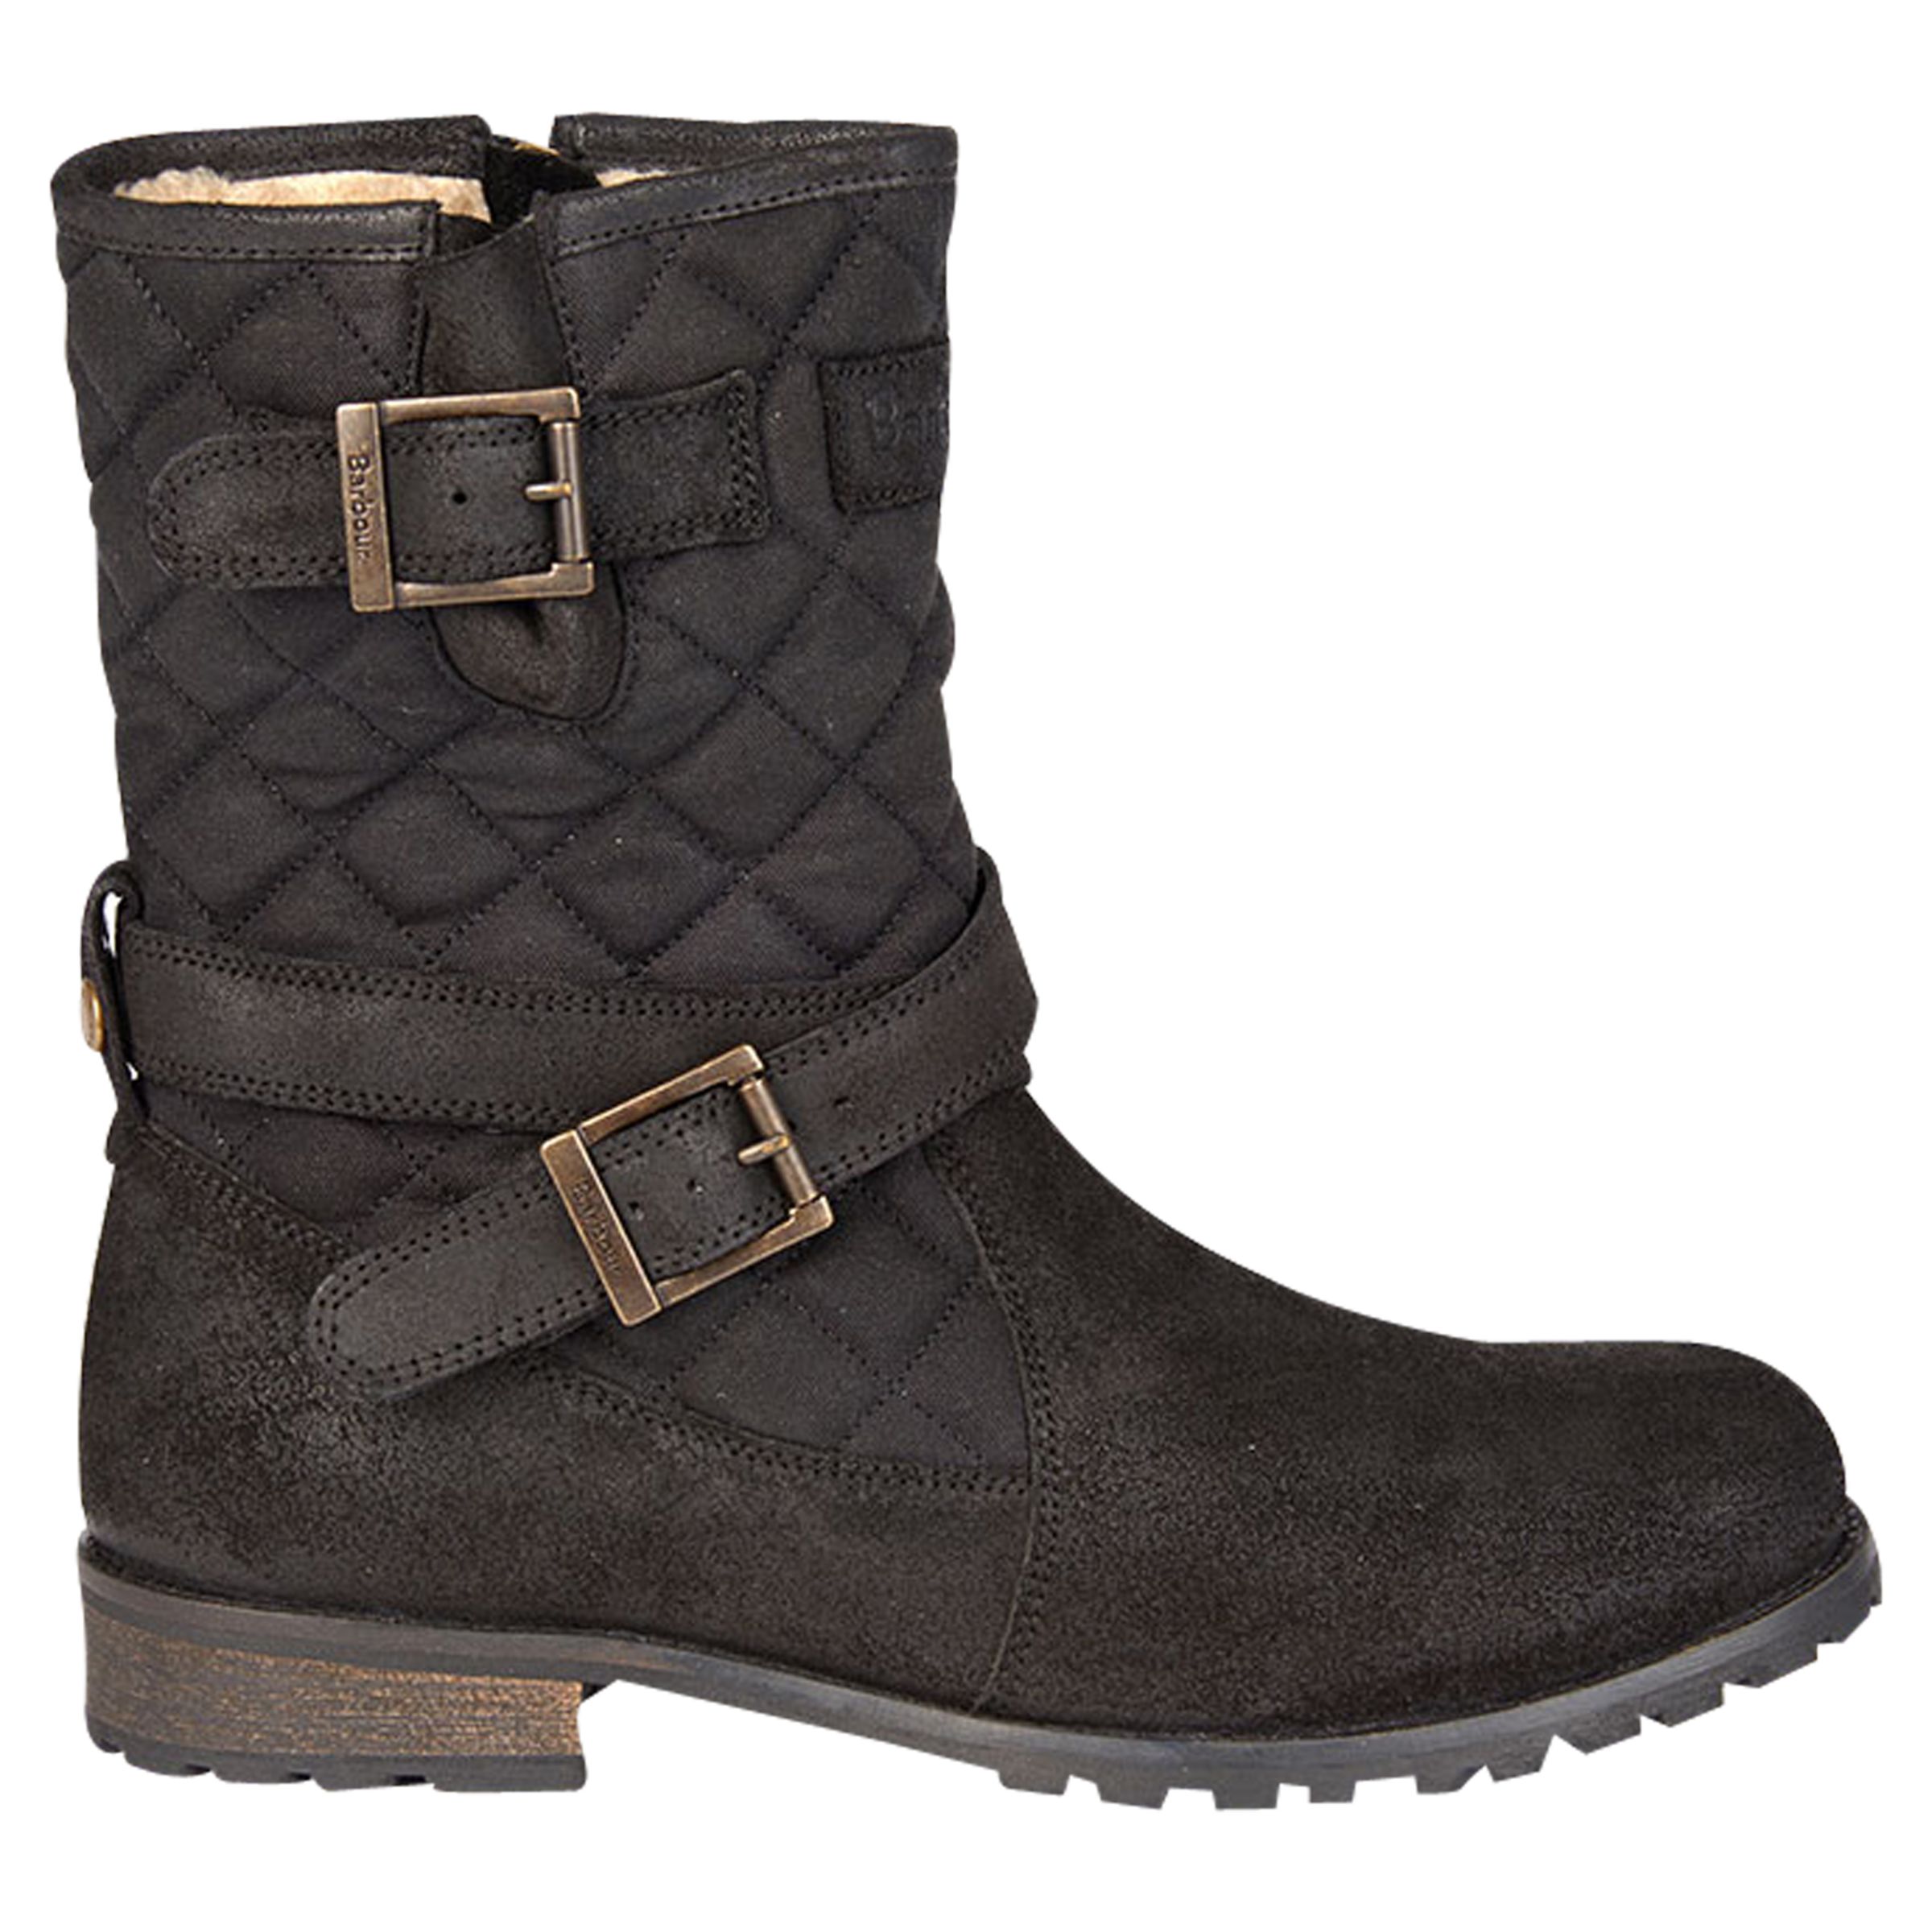 Barbour Balham Quilted Calf Boots, Black at John Lewis & Partners